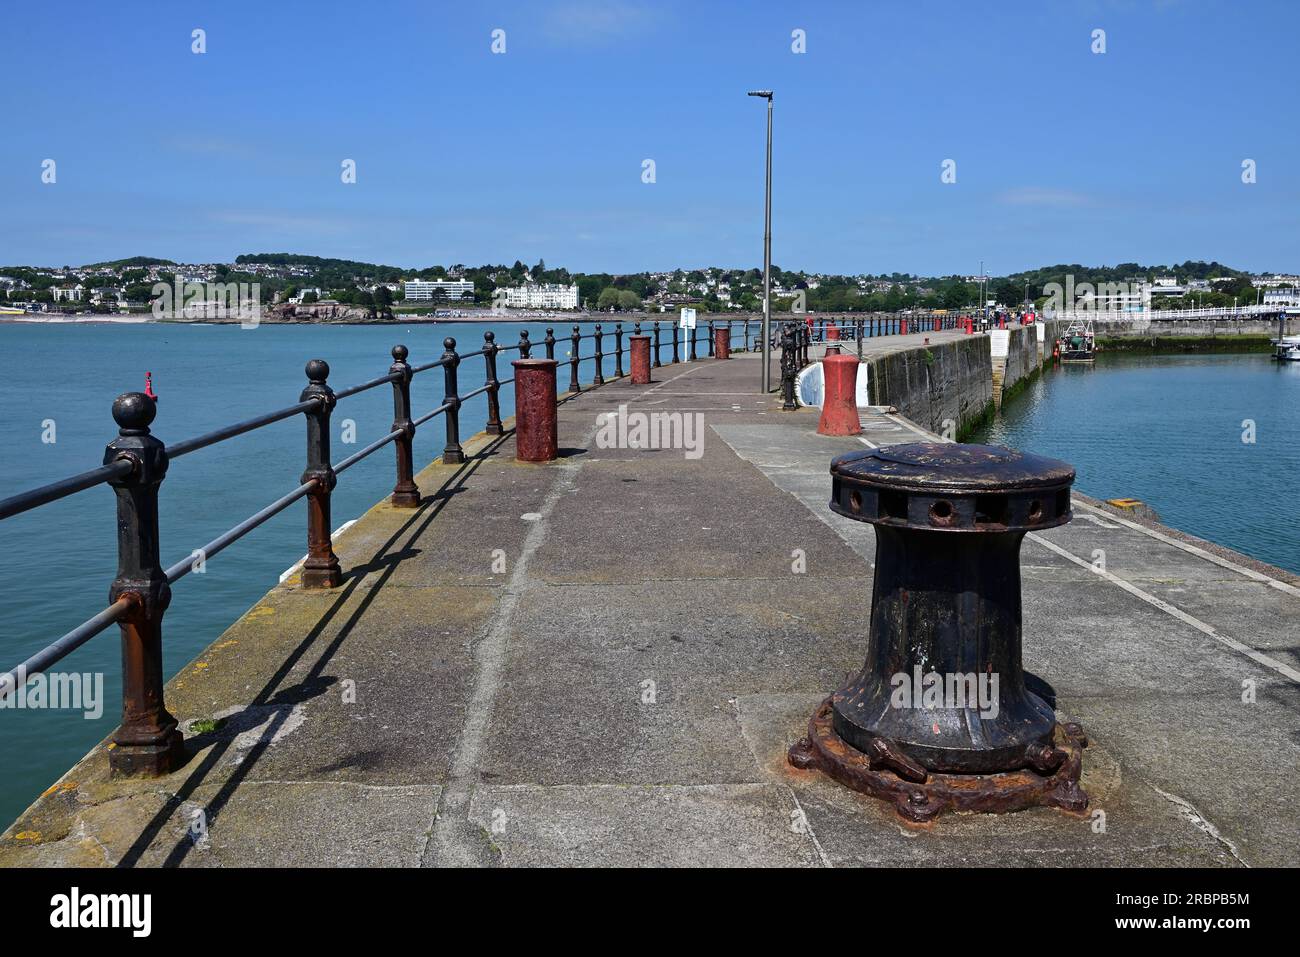 Haldon pier, which forms the outer wall of the harbour at Torquay, South Devon. Stock Photo